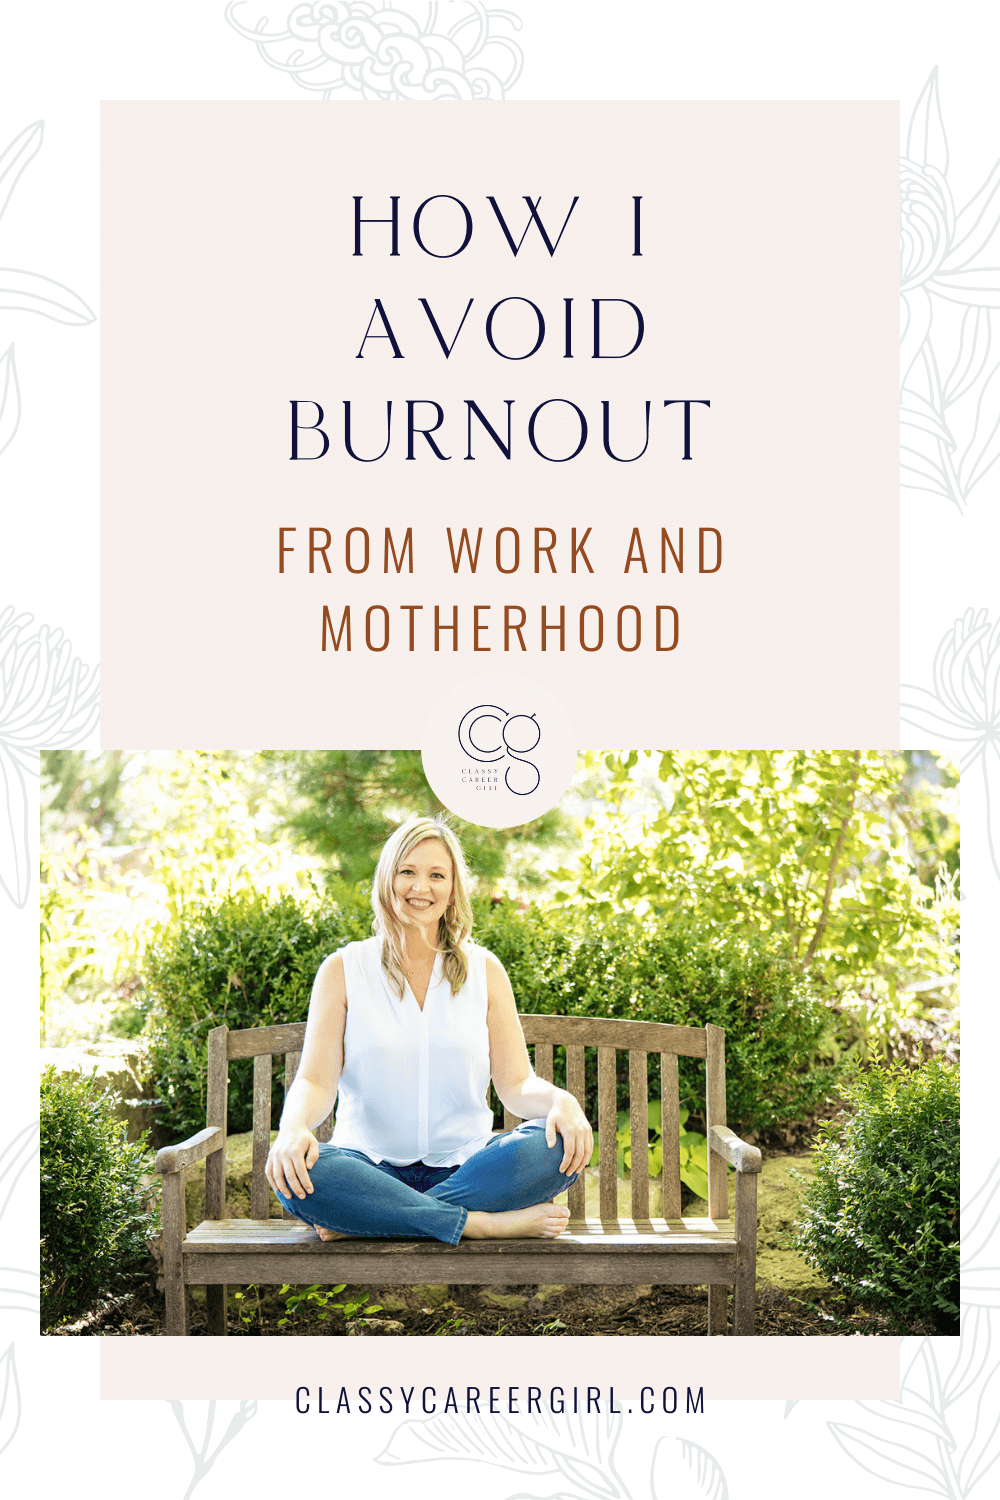 How I Avoid Burnout From Work and Motherhood Pin Image